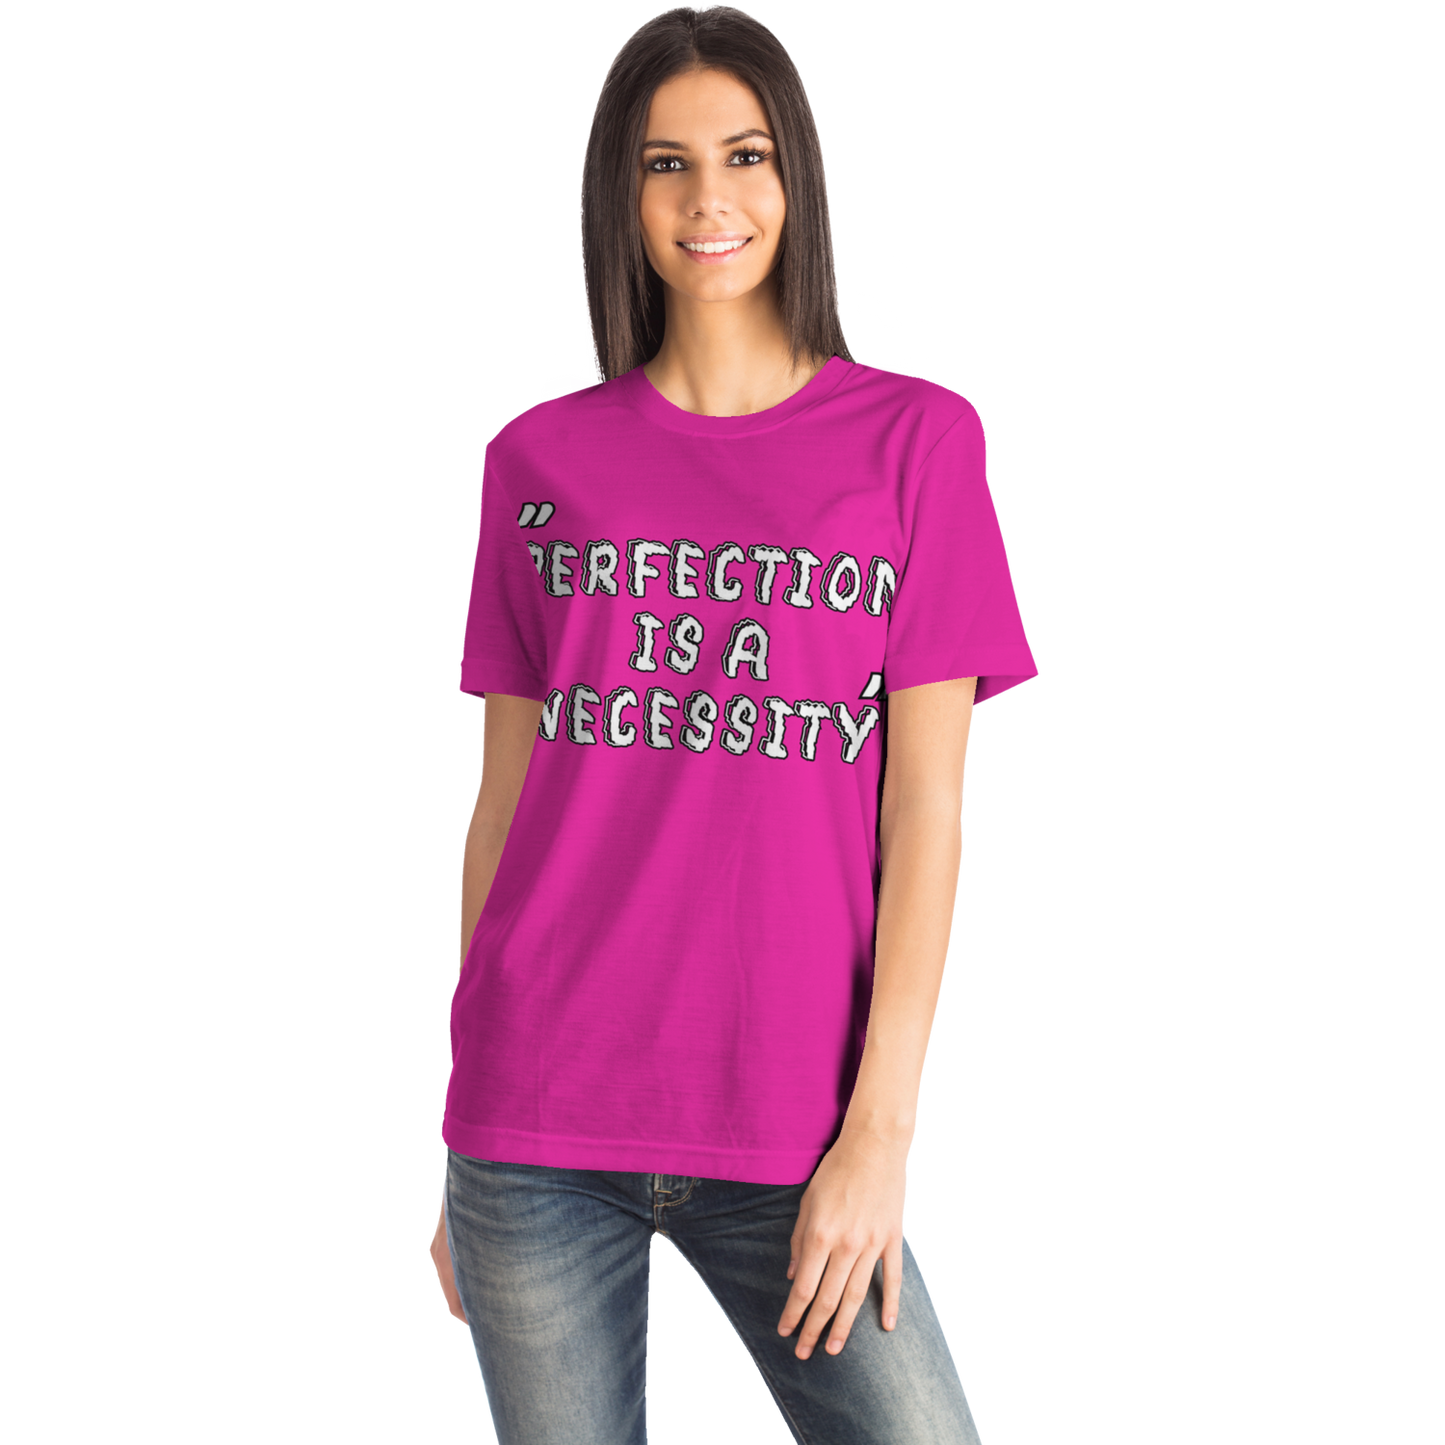 Perfection is a Necessity Winners Win T-Shirt Pink